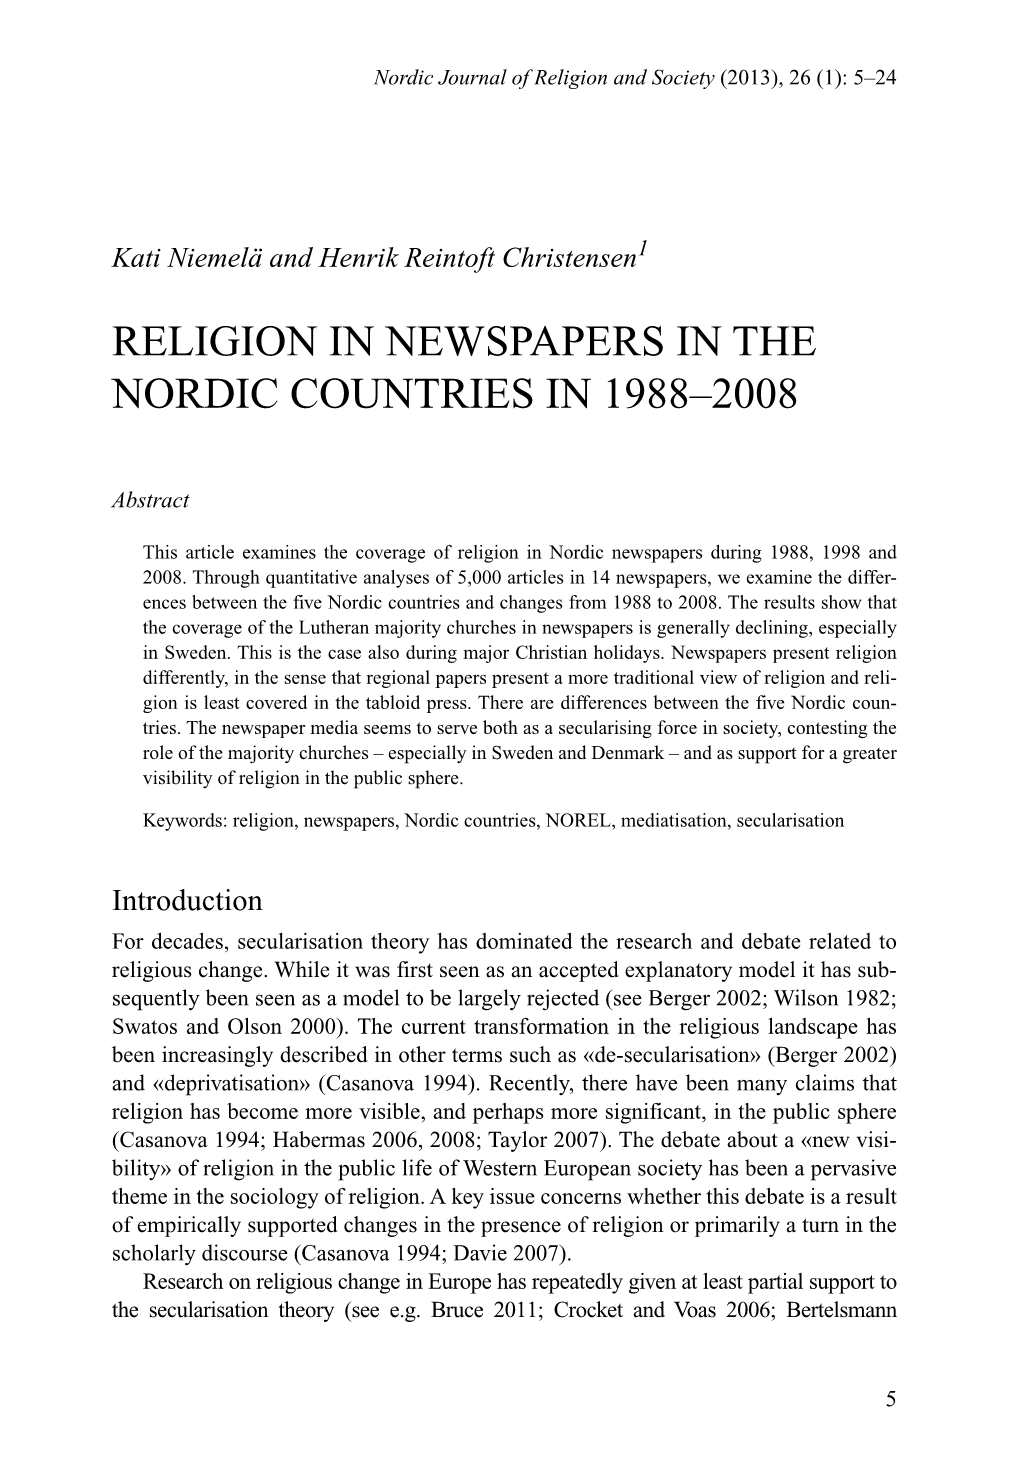 Religion in Newspapers in the Nordic Countries in 1988–2008